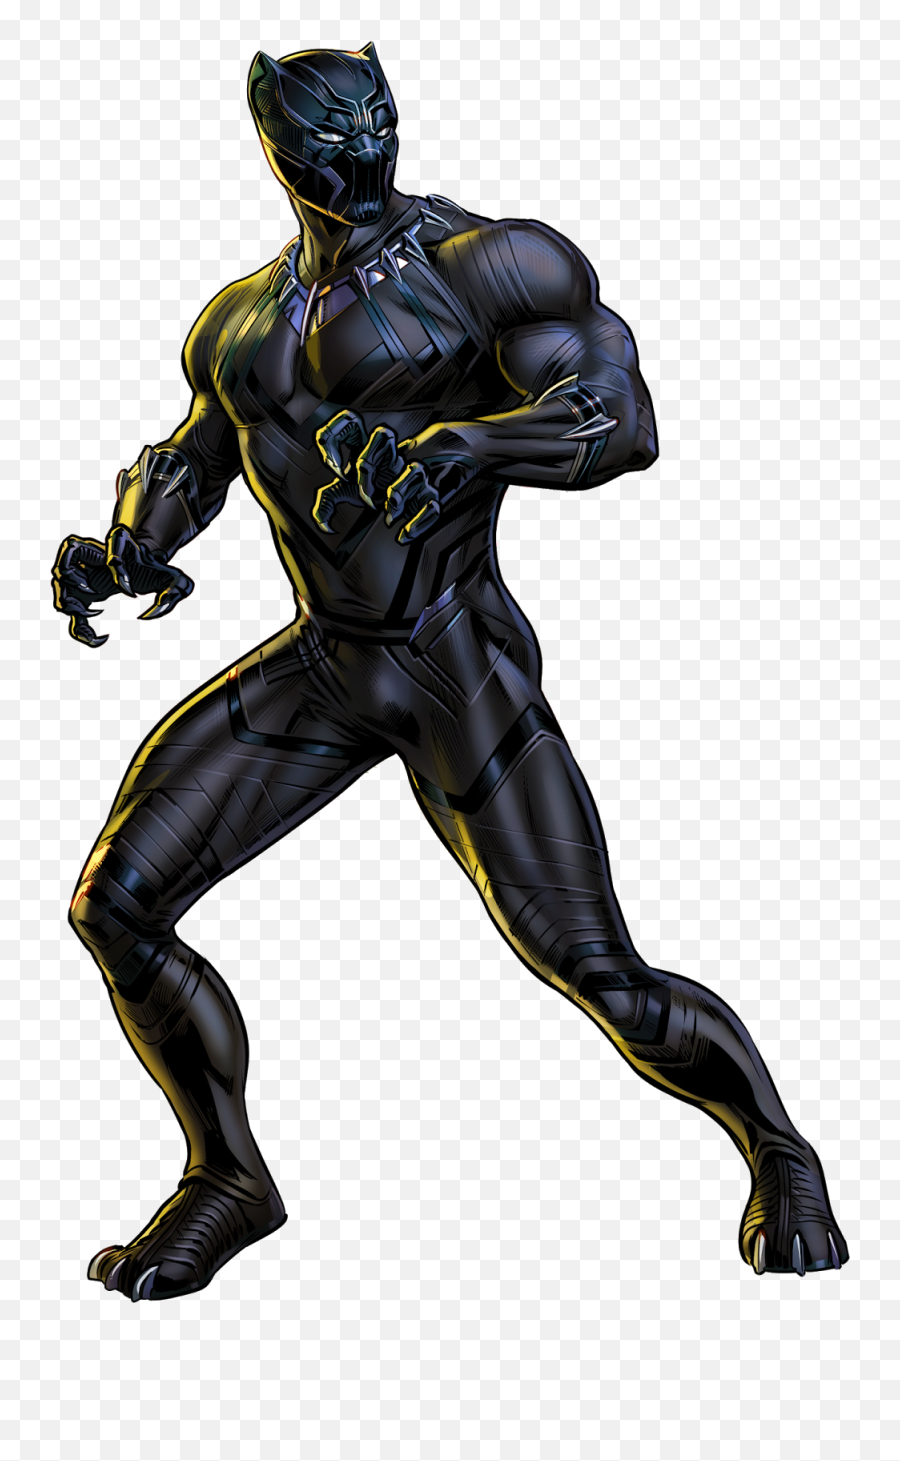 Download Black Panther Png Image For Free - Black Panther Png Emoji,Black Panther Png